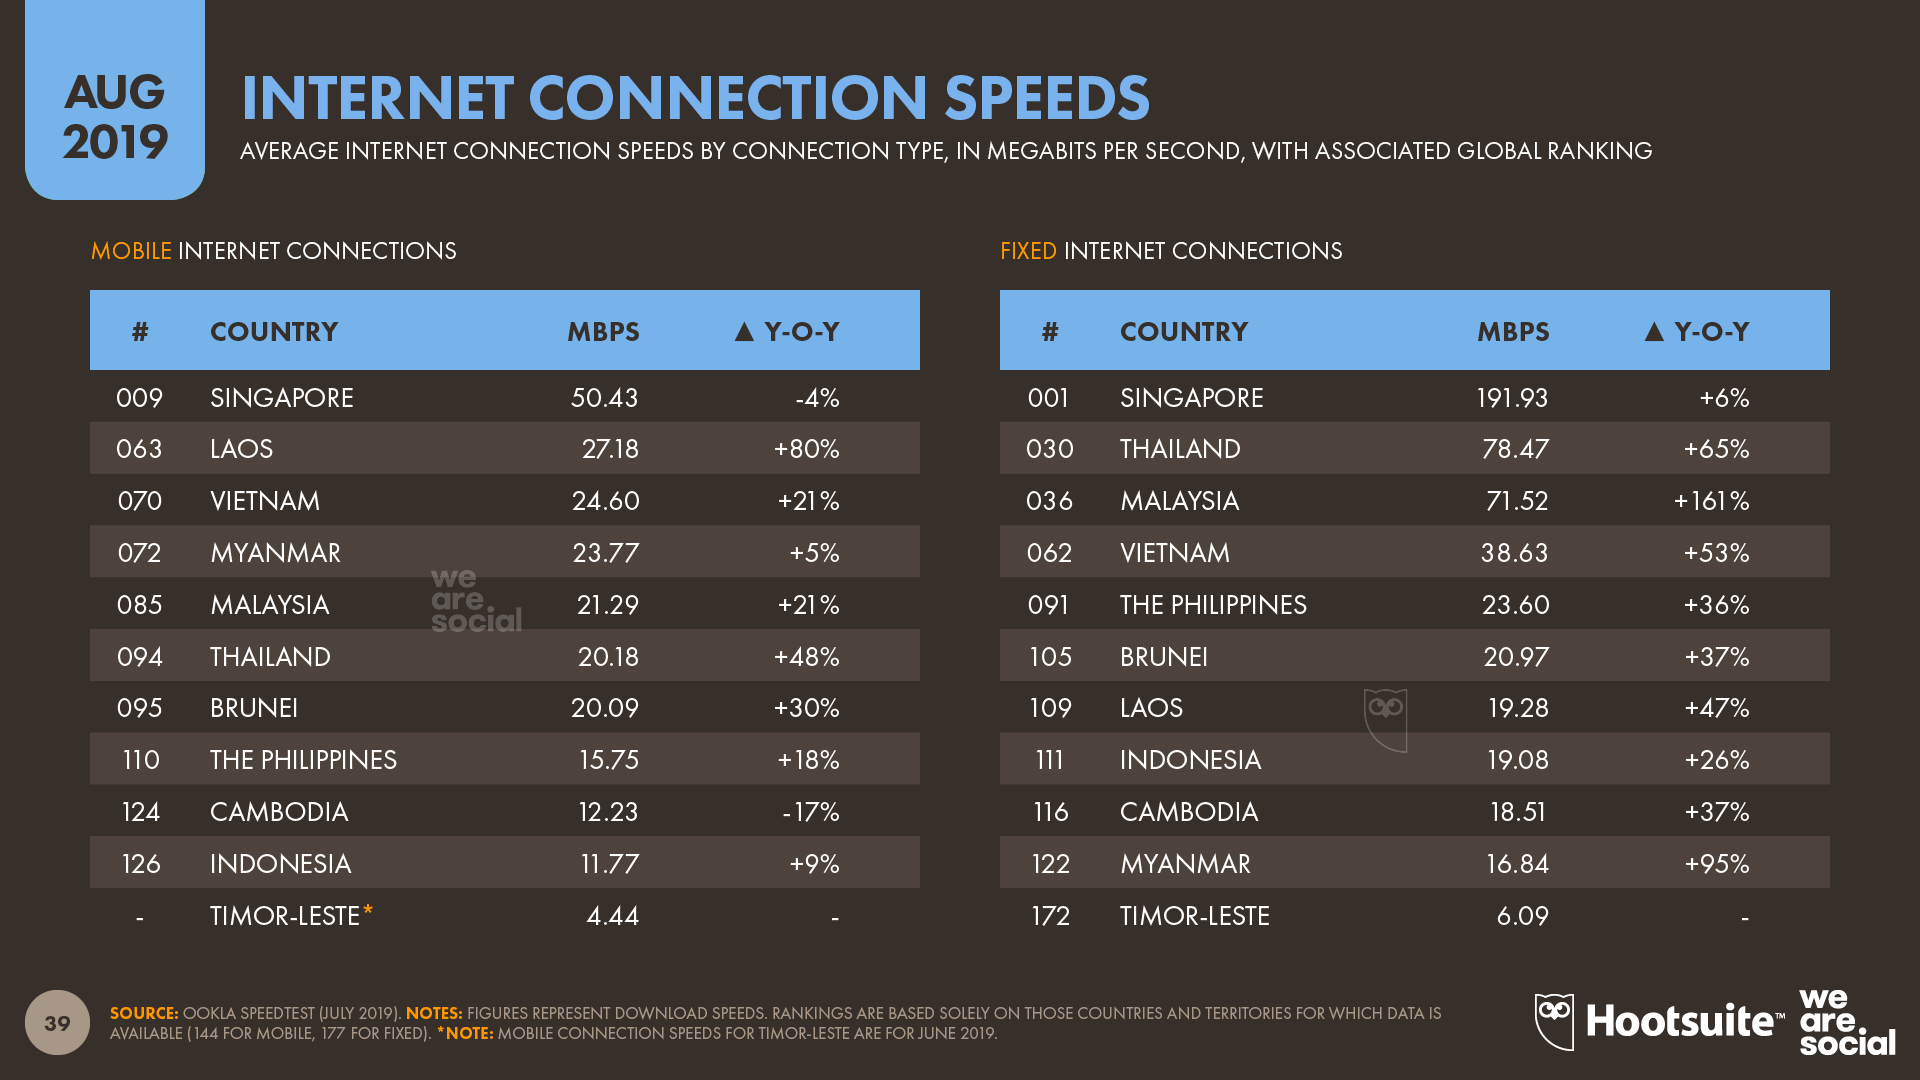 Internet Connection Speeds (Mobile and Fixed) by Southeast-Asian Country August 2019